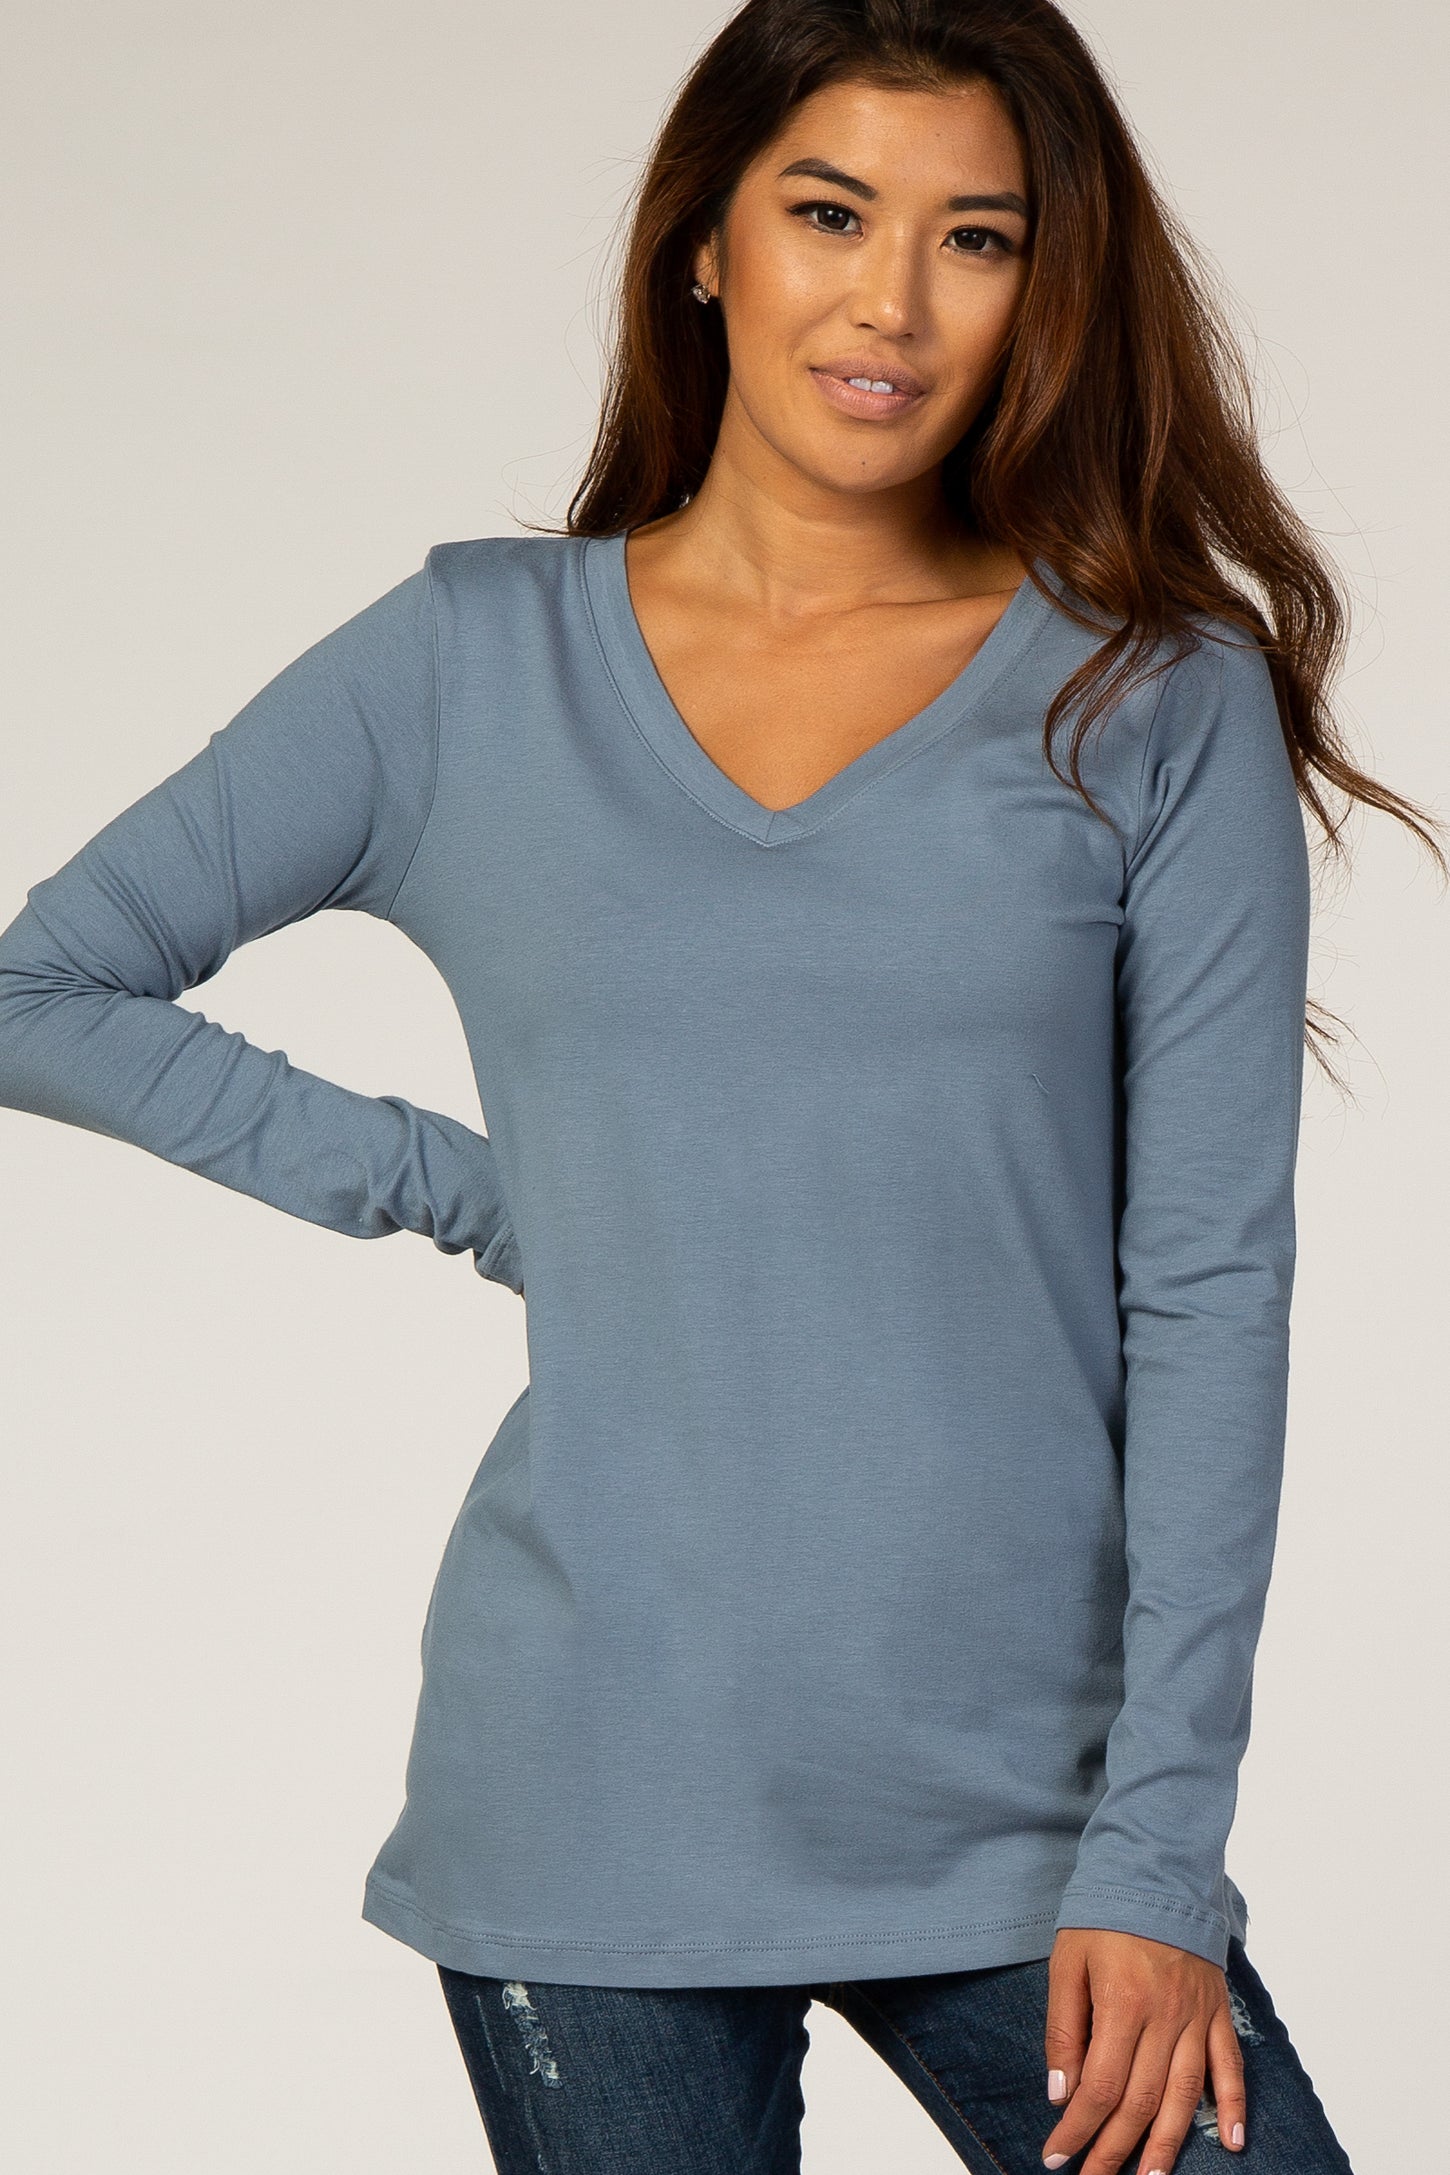 Slate Blue Fitted V-Neck Maternity Top